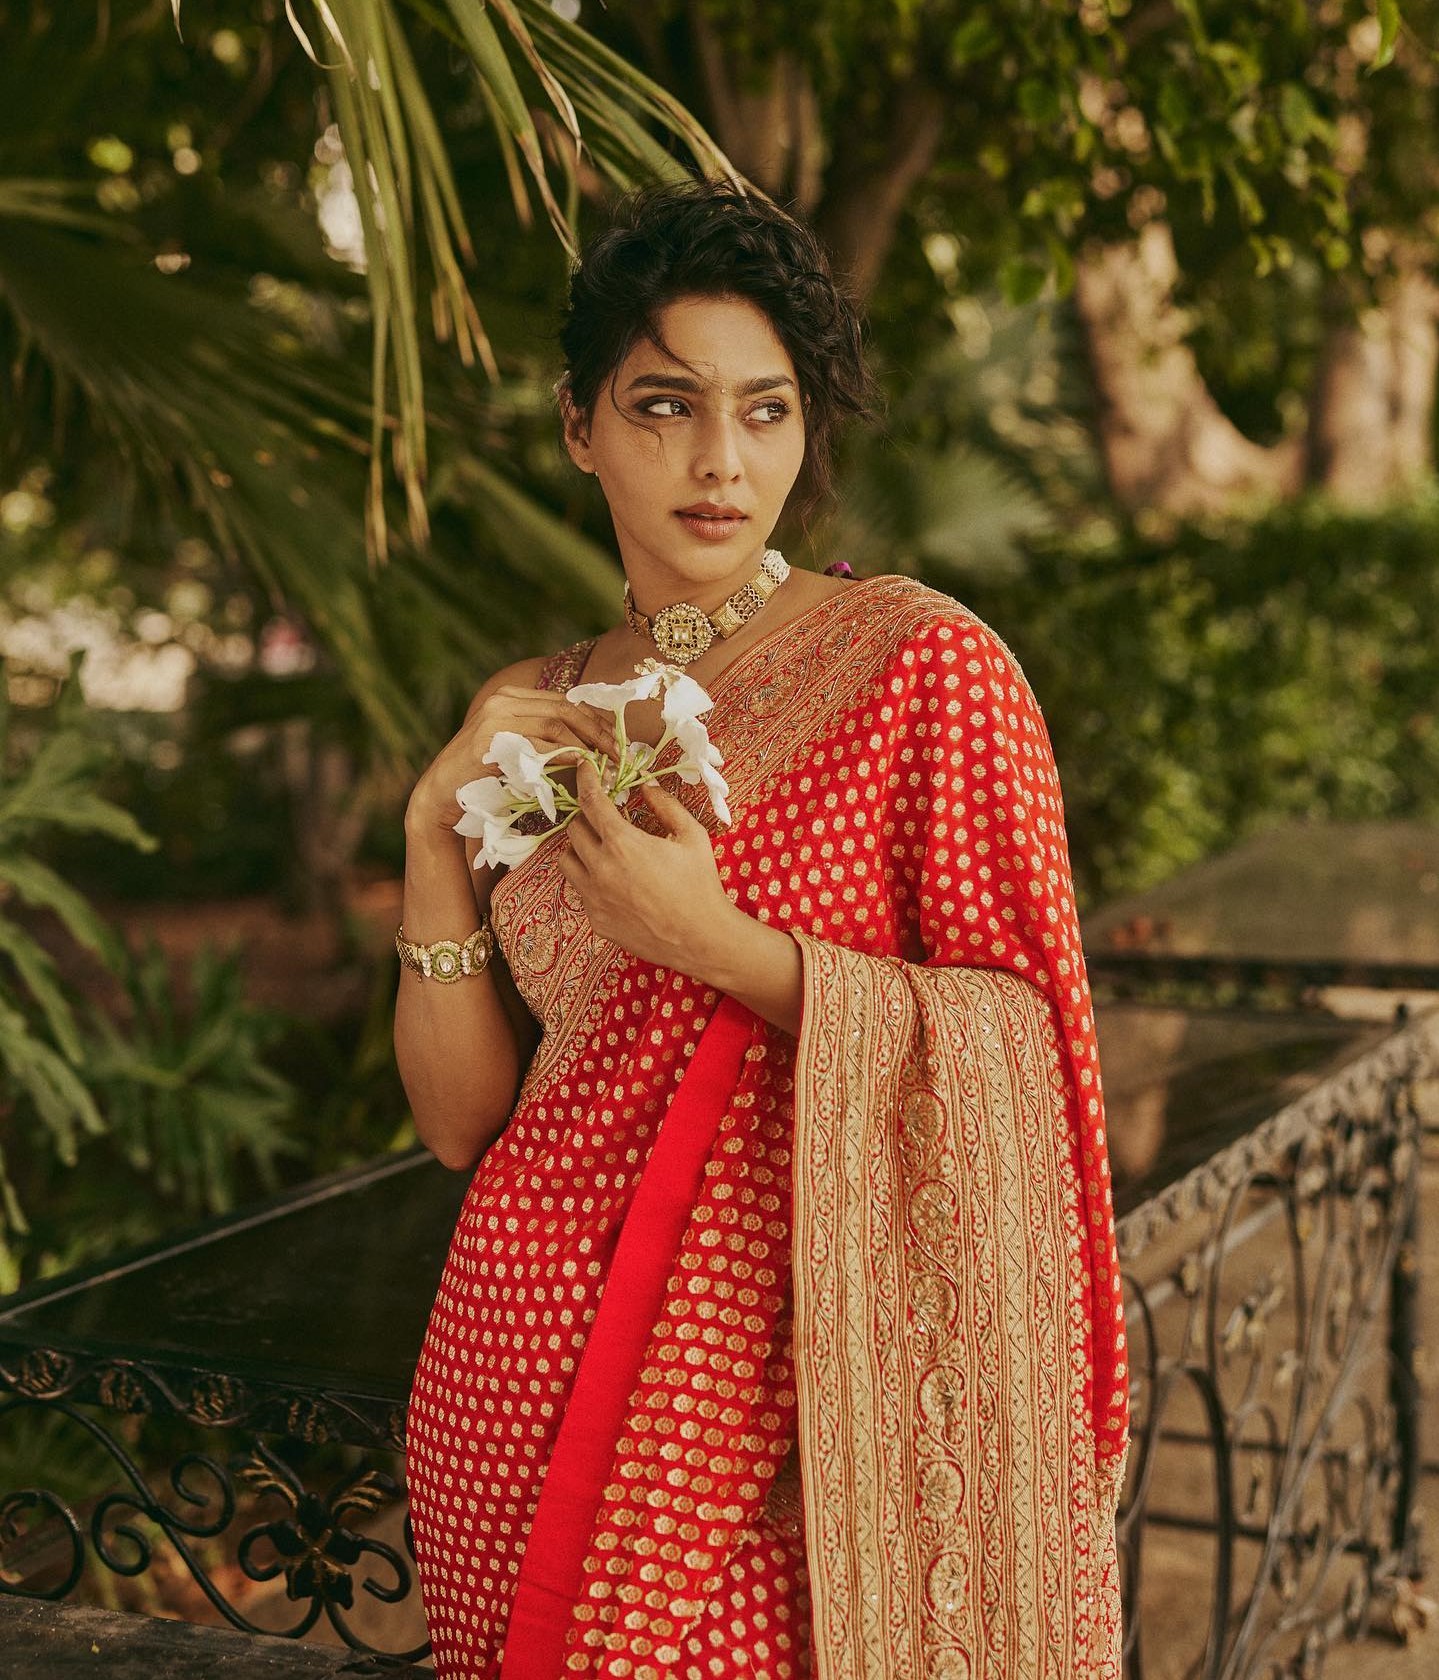 Aishwarya Lekshmi Slaying The Red Heavy Embroidered Saree Look In A Bold Way